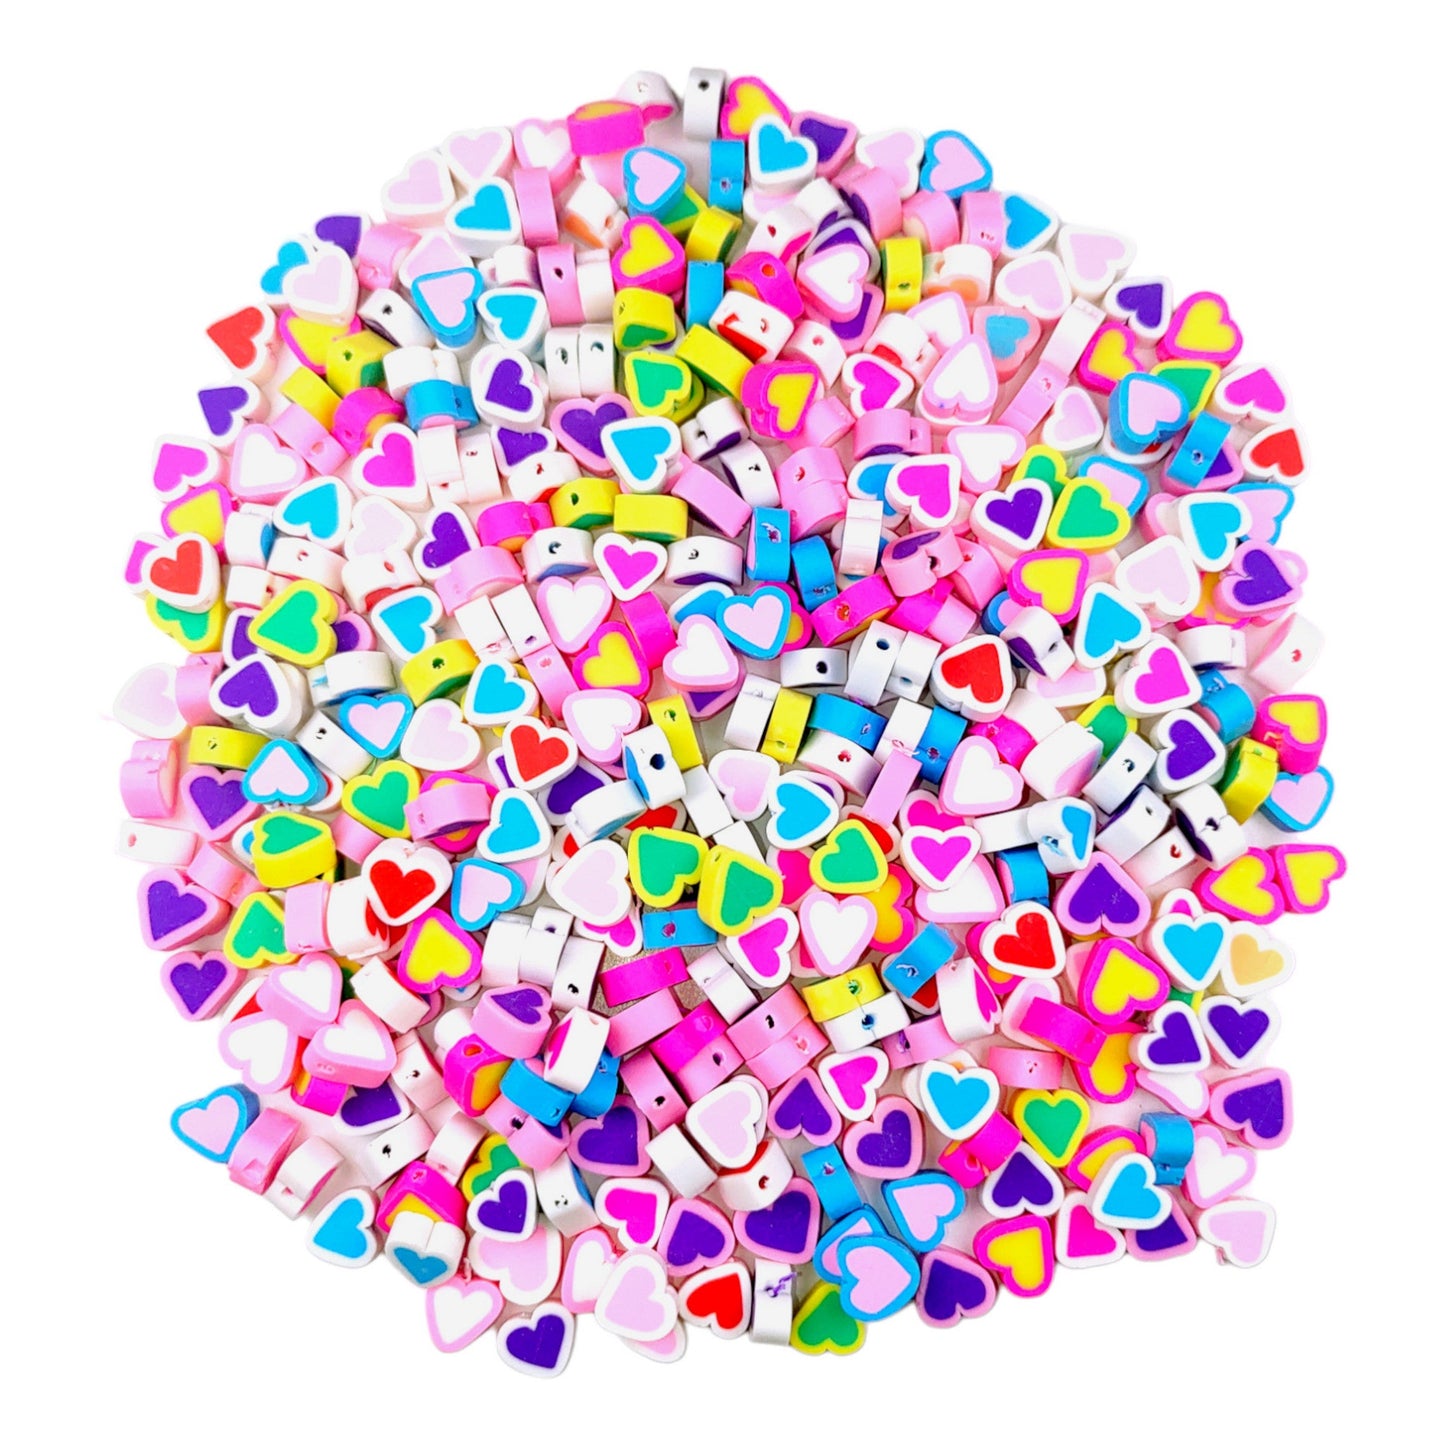 Colorful Heart Shape Soft Resin Motif For Crafting or Decor - 13533